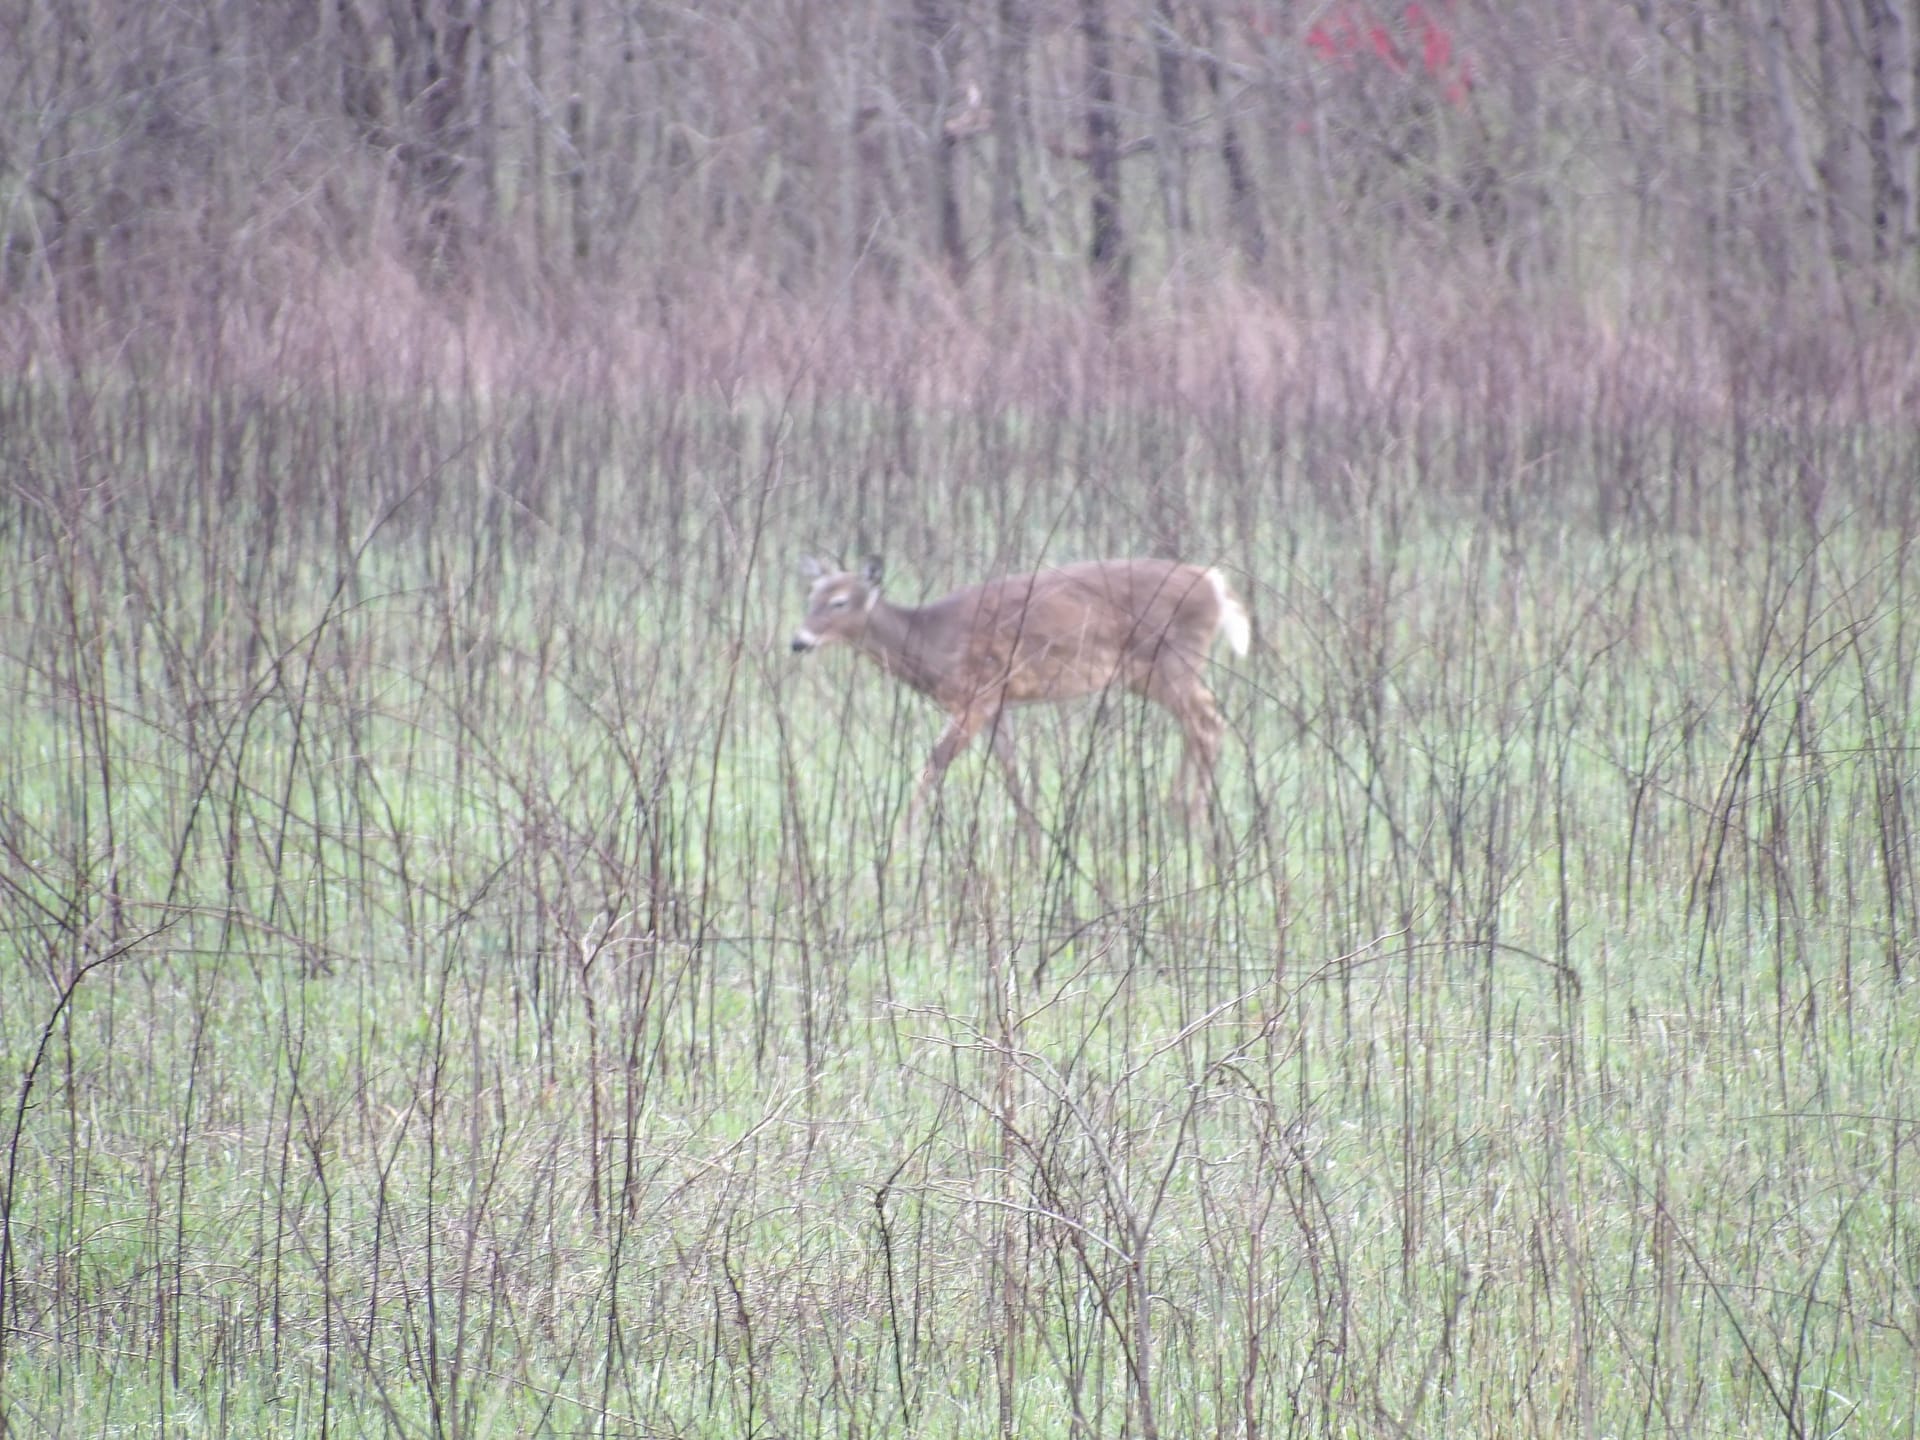 white tail deer in the wild
ABOUT US